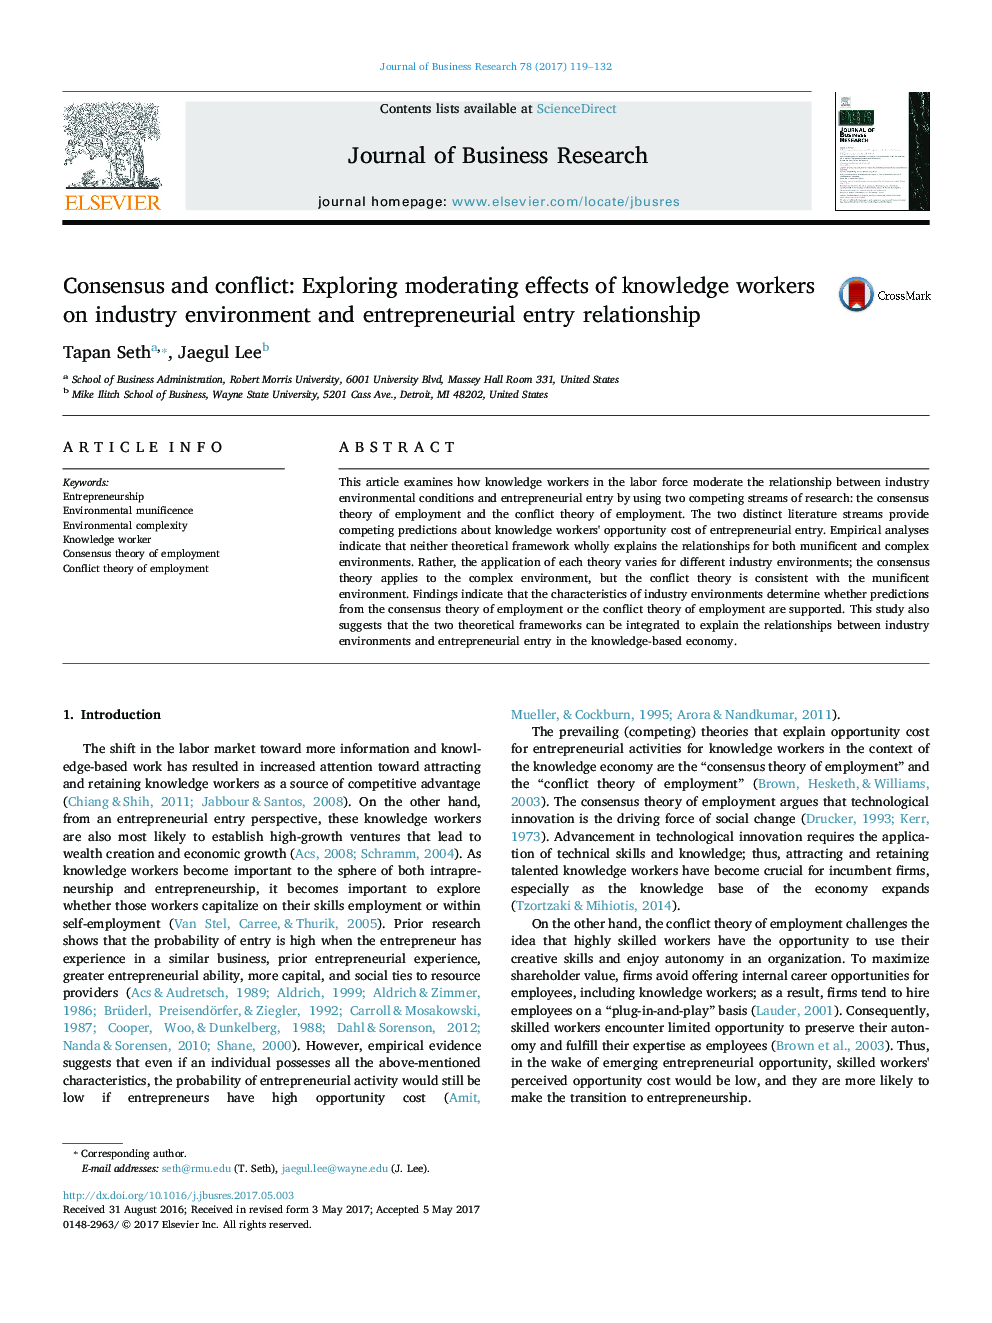 Consensus and conflict: Exploring moderating effects of knowledge workers on industry environment and entrepreneurial entry relationship